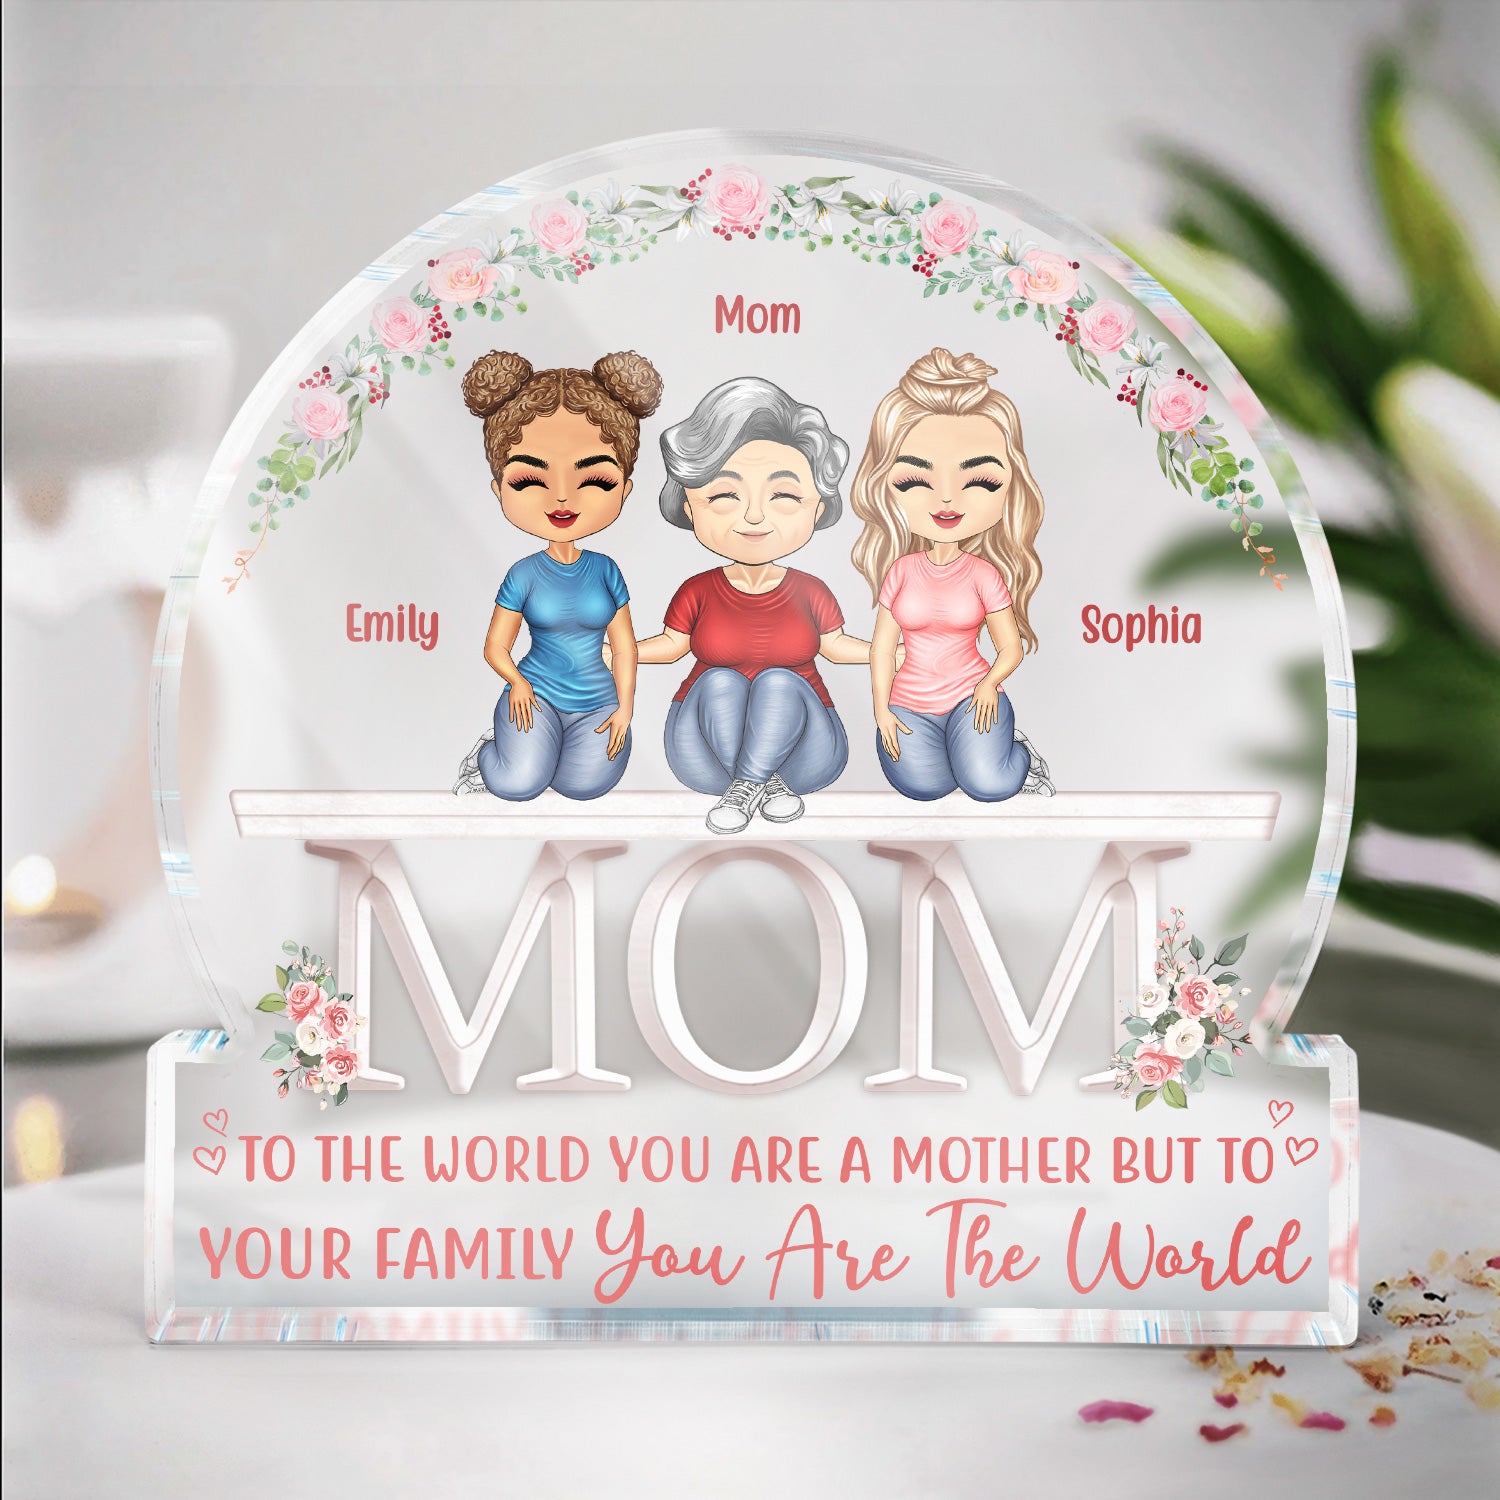 To The World You Are A Mother - Loving Gift For Mother, Grandma, Grandmother - Personalized Round Shaped Acrylic Plaque